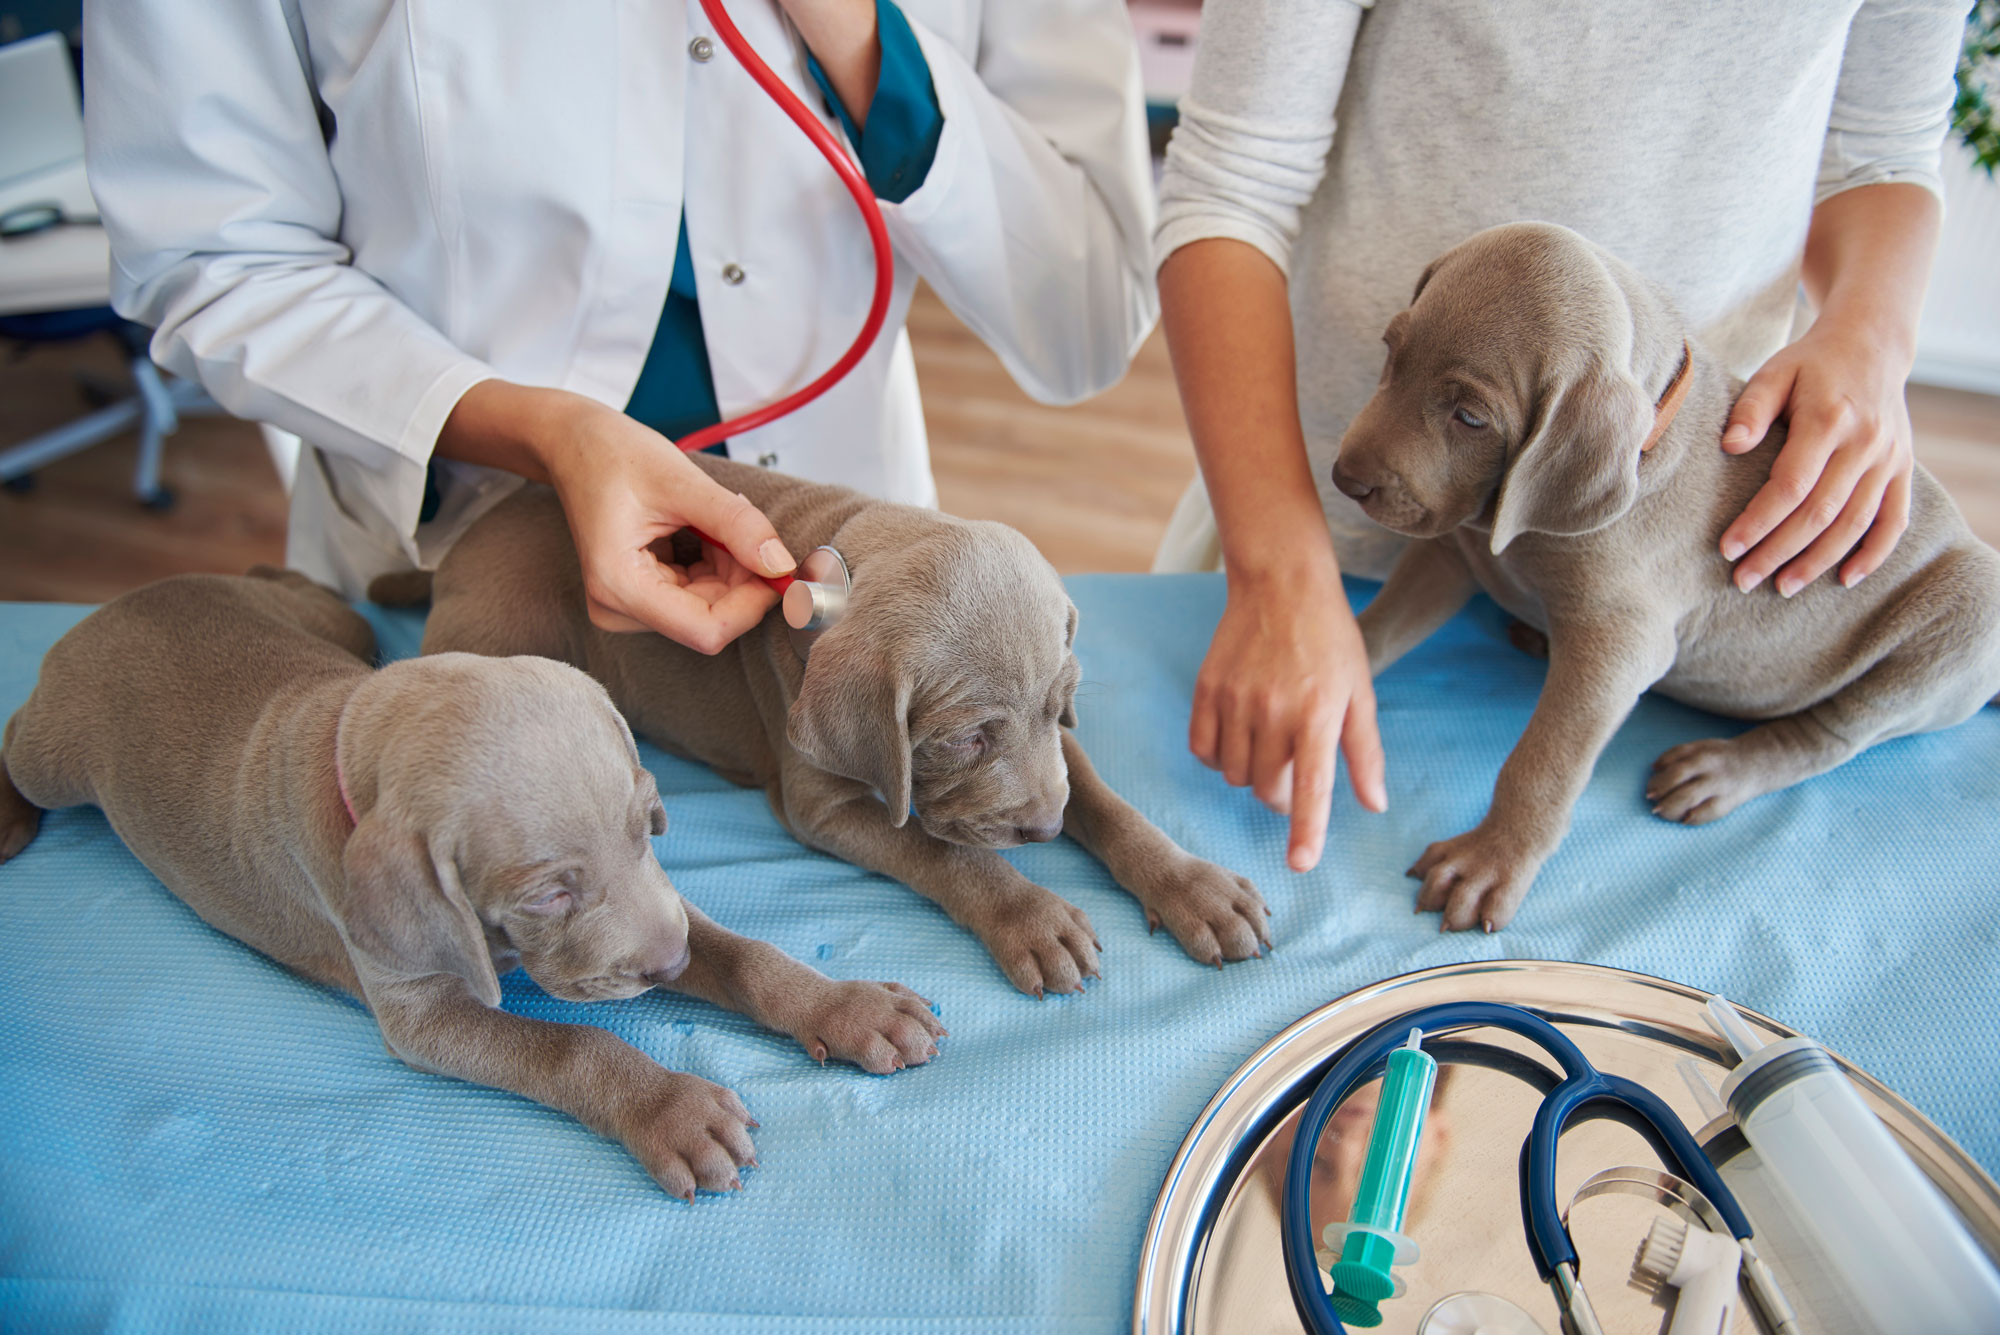 Detection of Leishmania in samples from dogs as a preventive measure